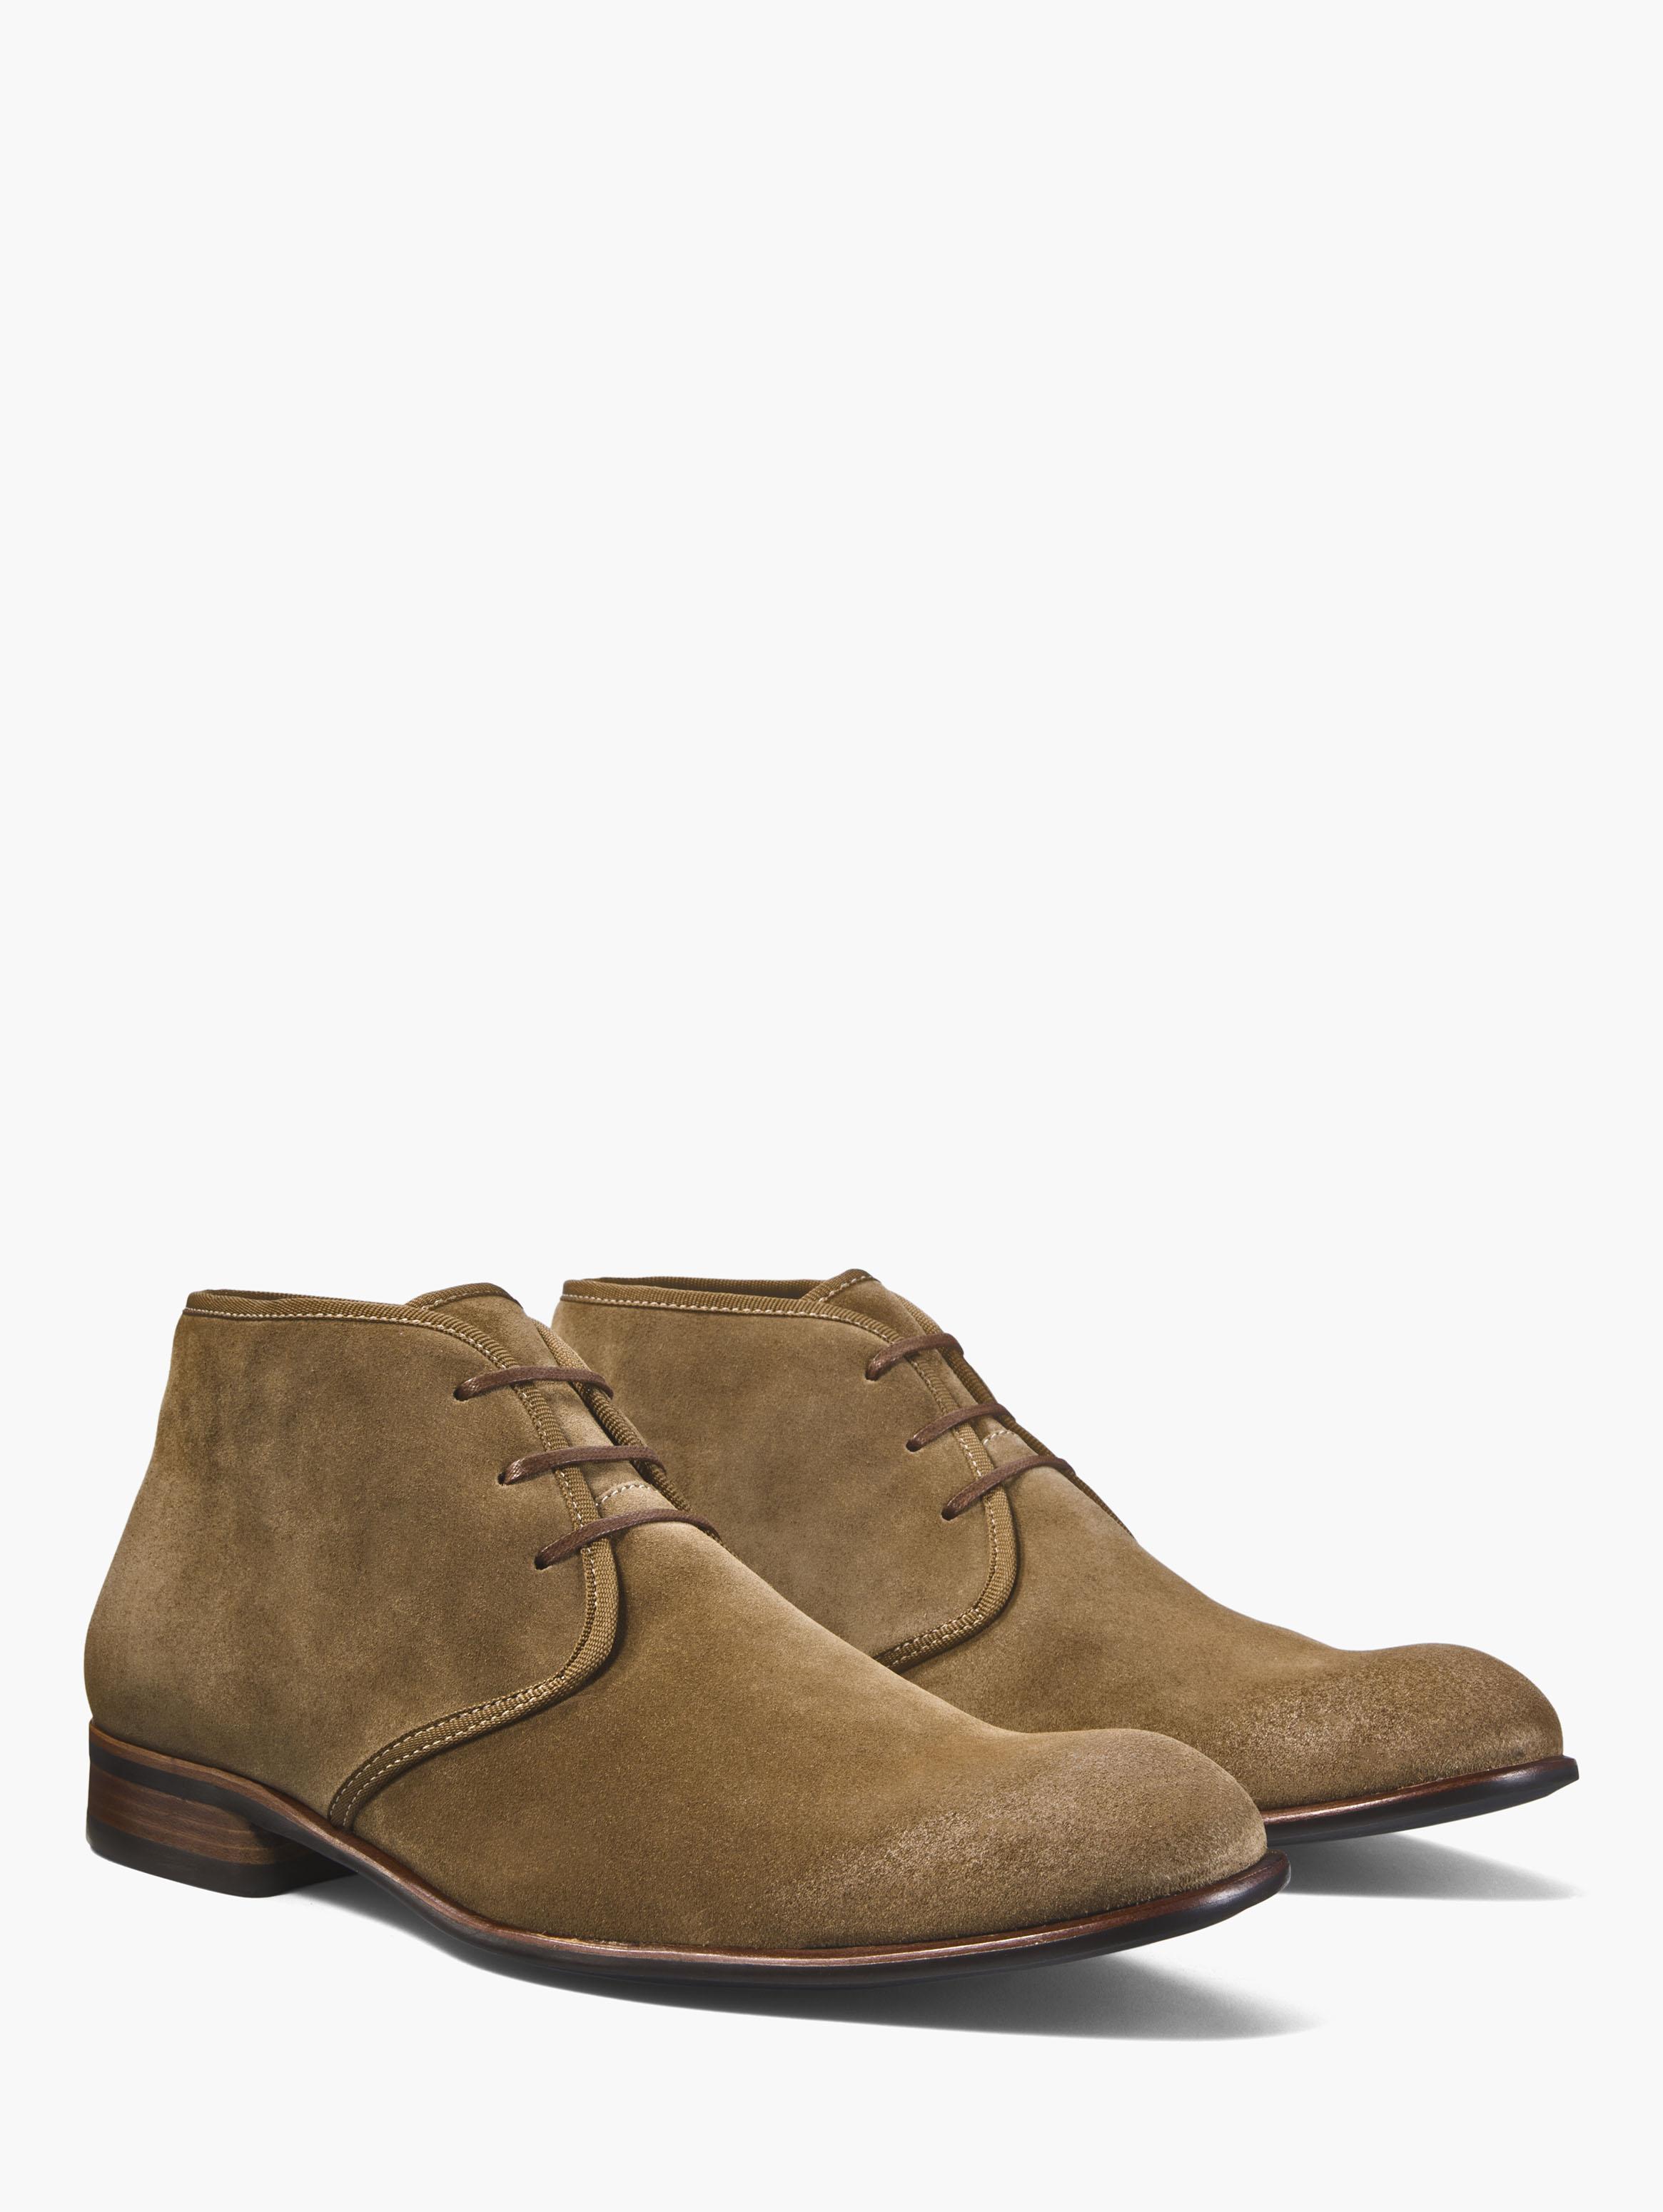 SEAGHER CHUKKA BOOT image number 1